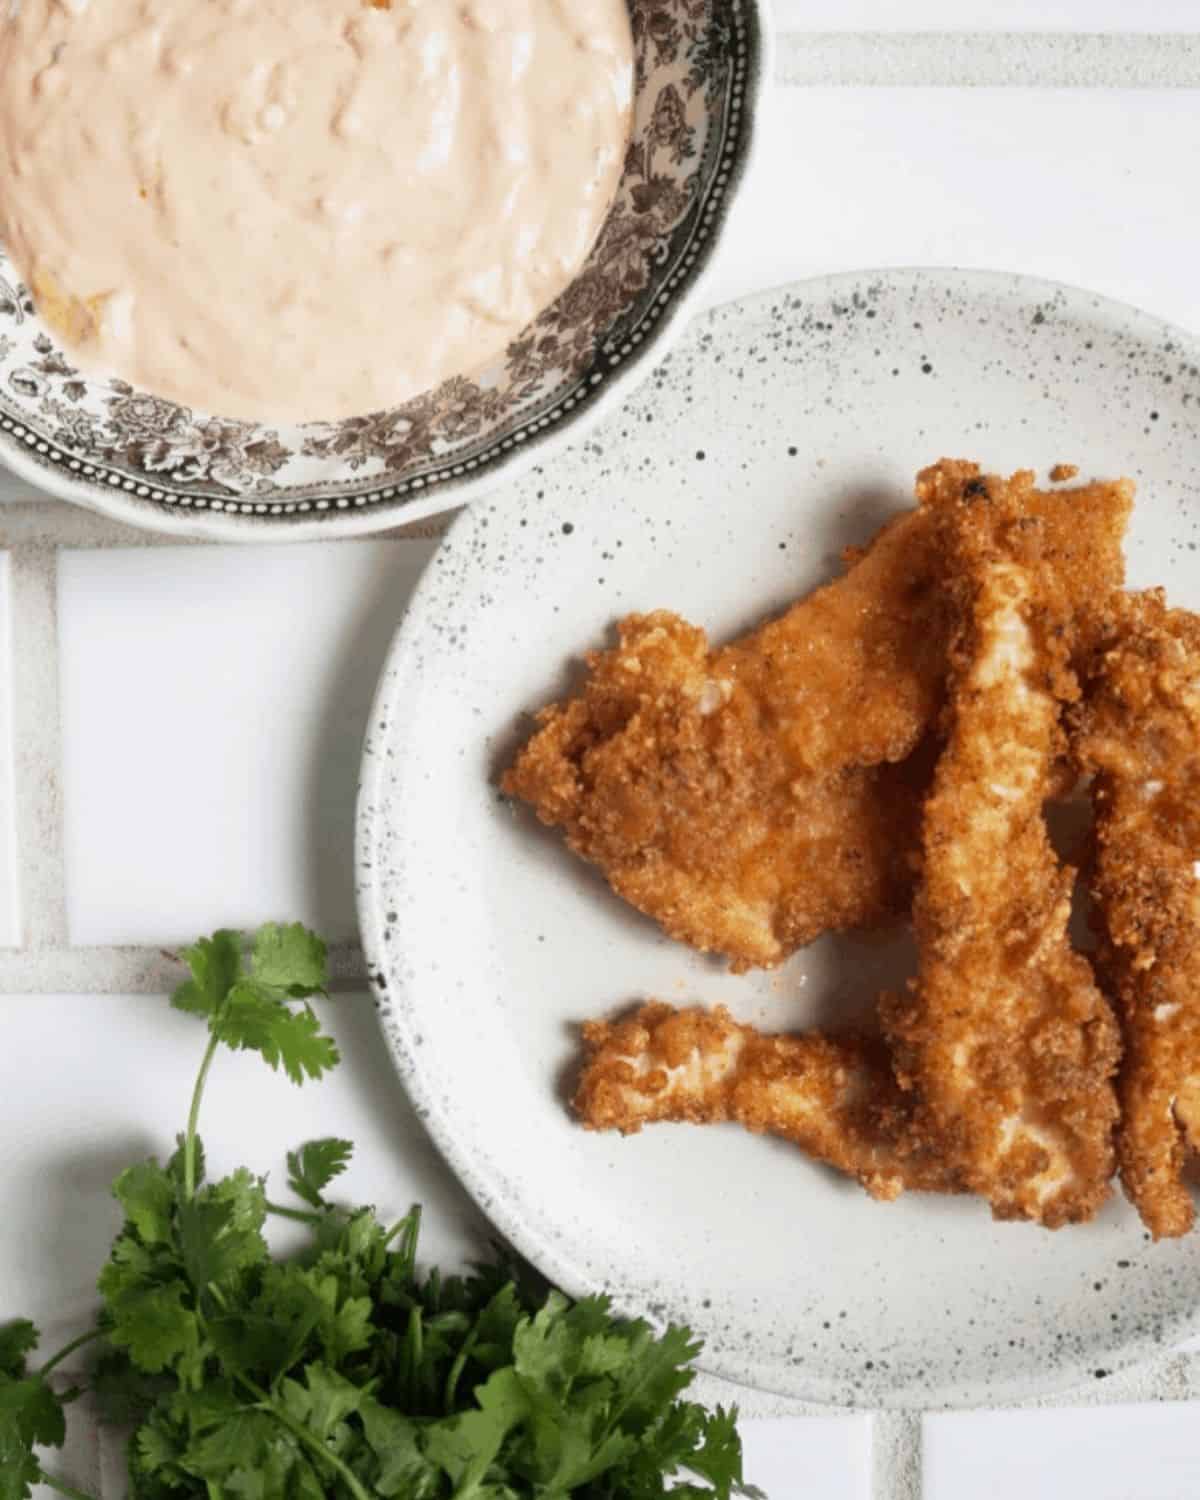 Keto bang bang sauce in a bowl next to a plate of chicken fingers.